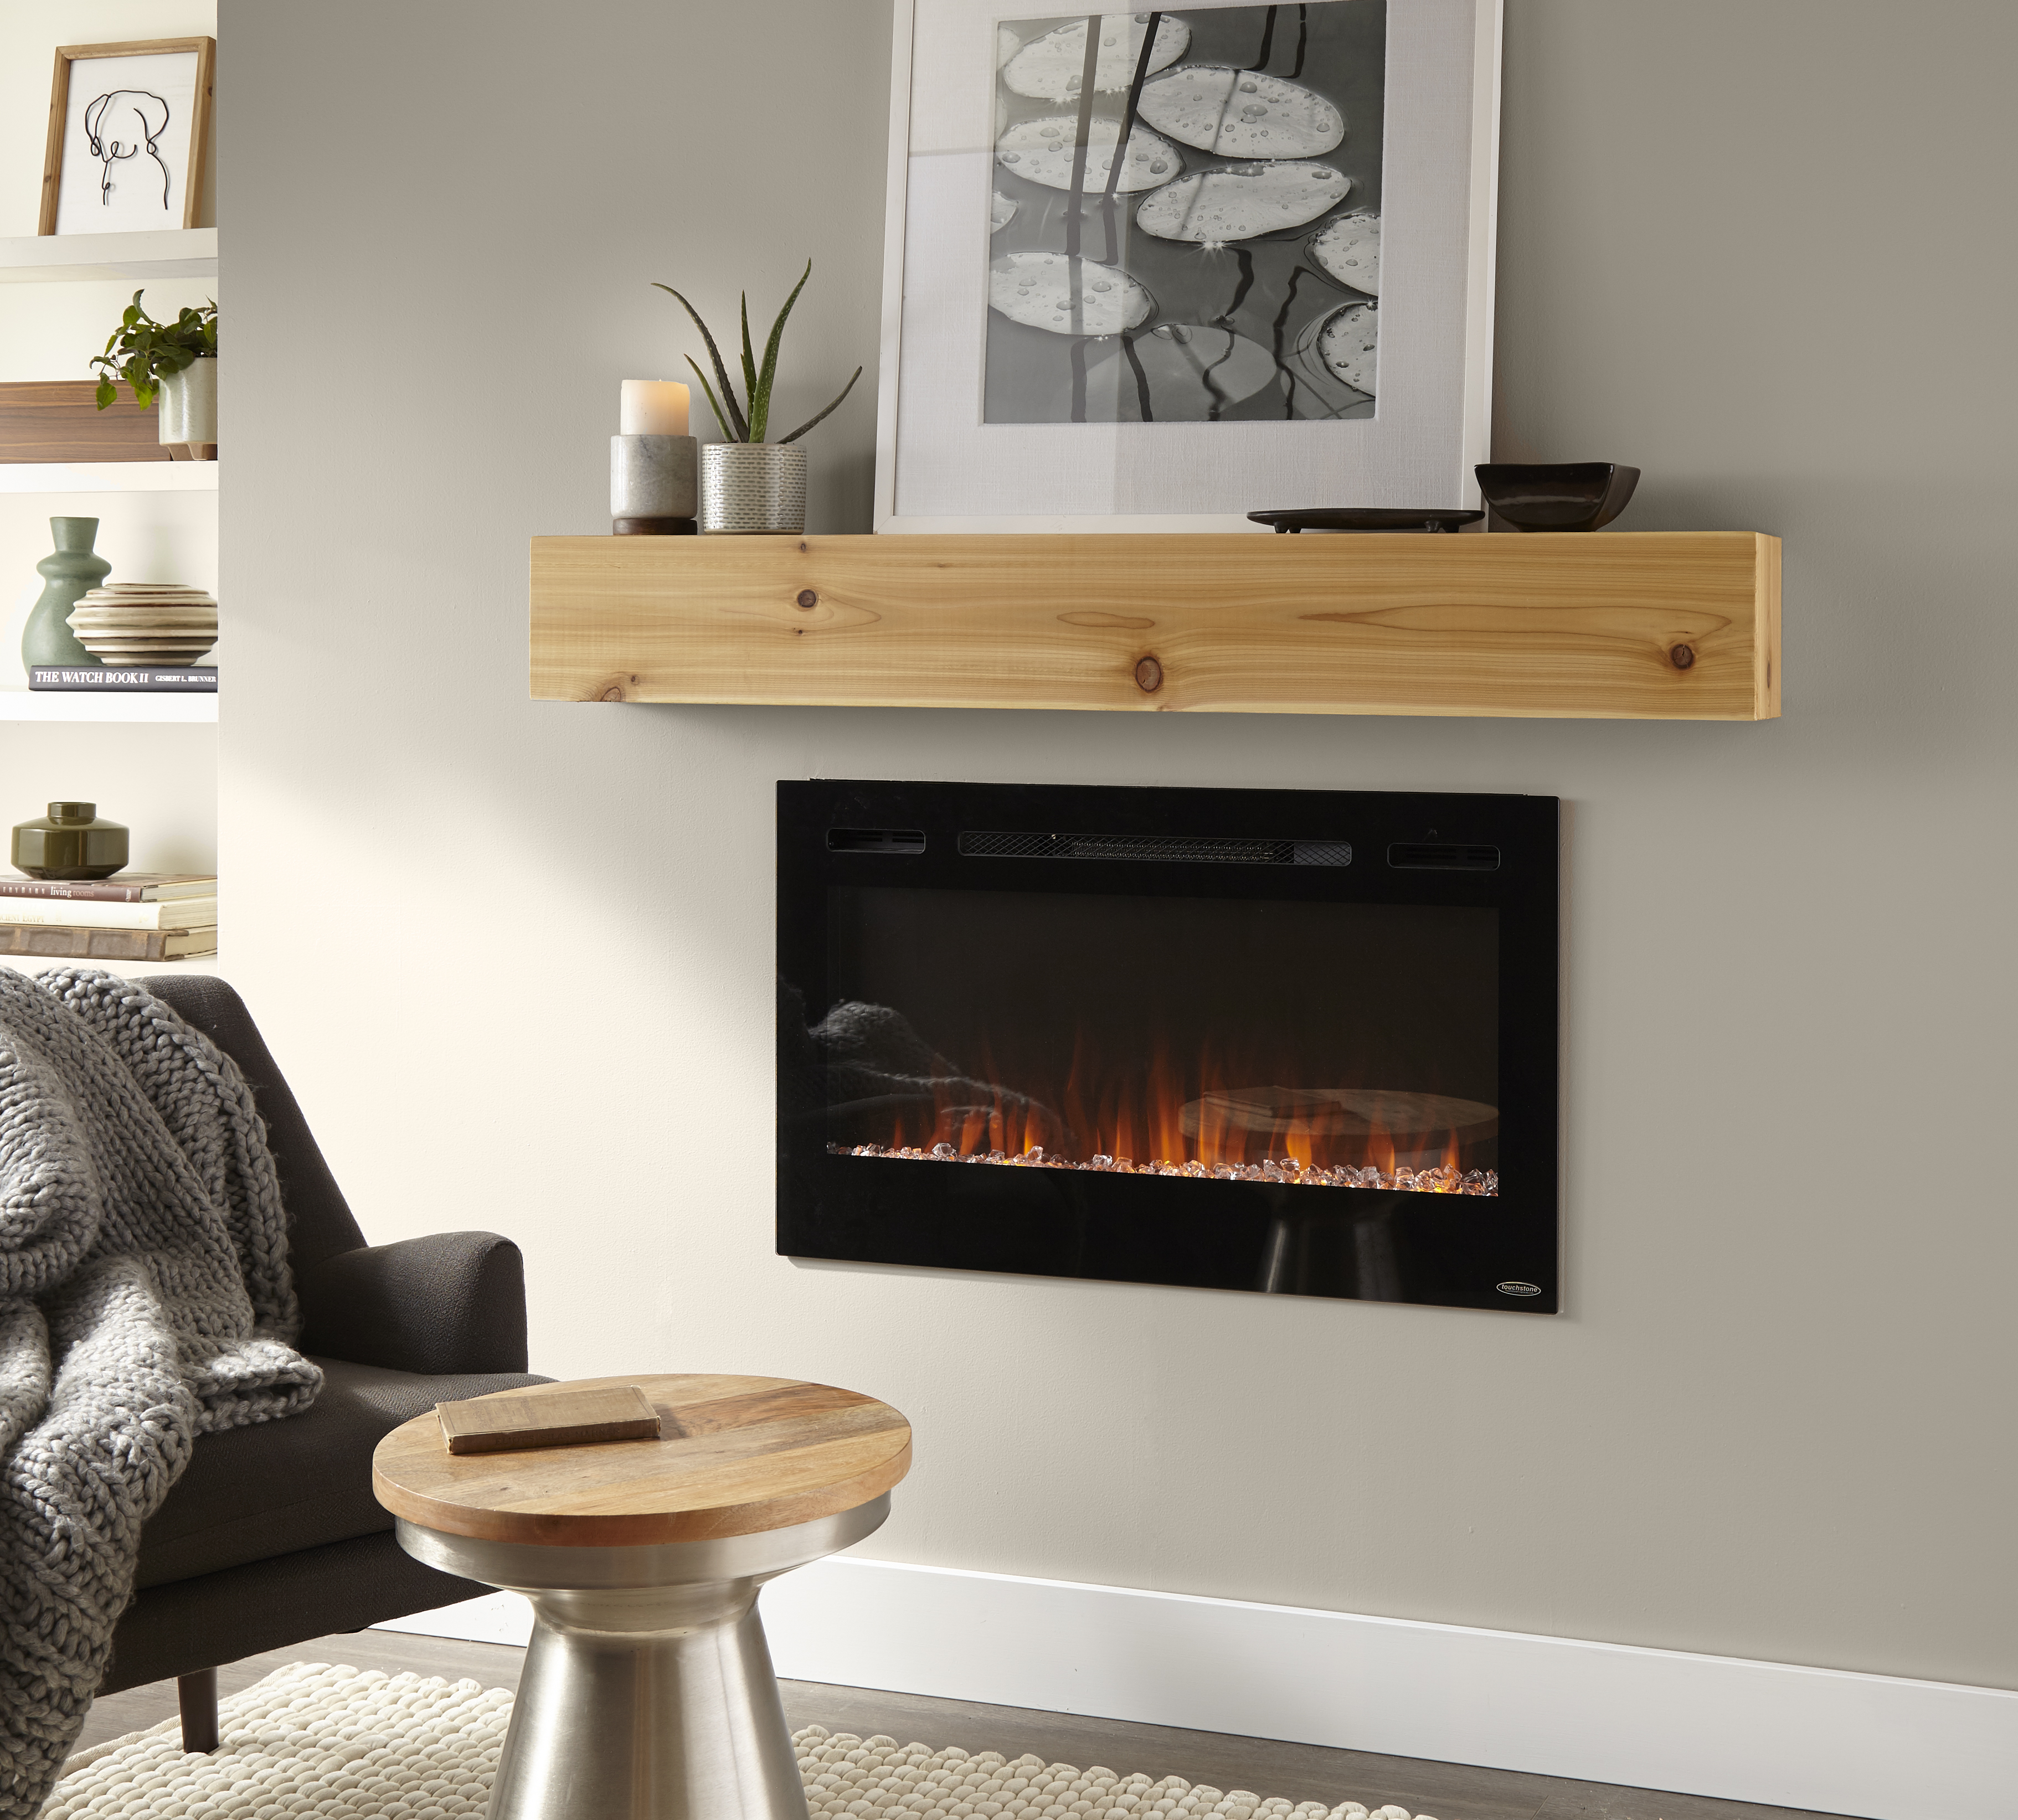 A cozy fireplace set into a wall with a wood mantel above, and walls painted in a warm greige colour